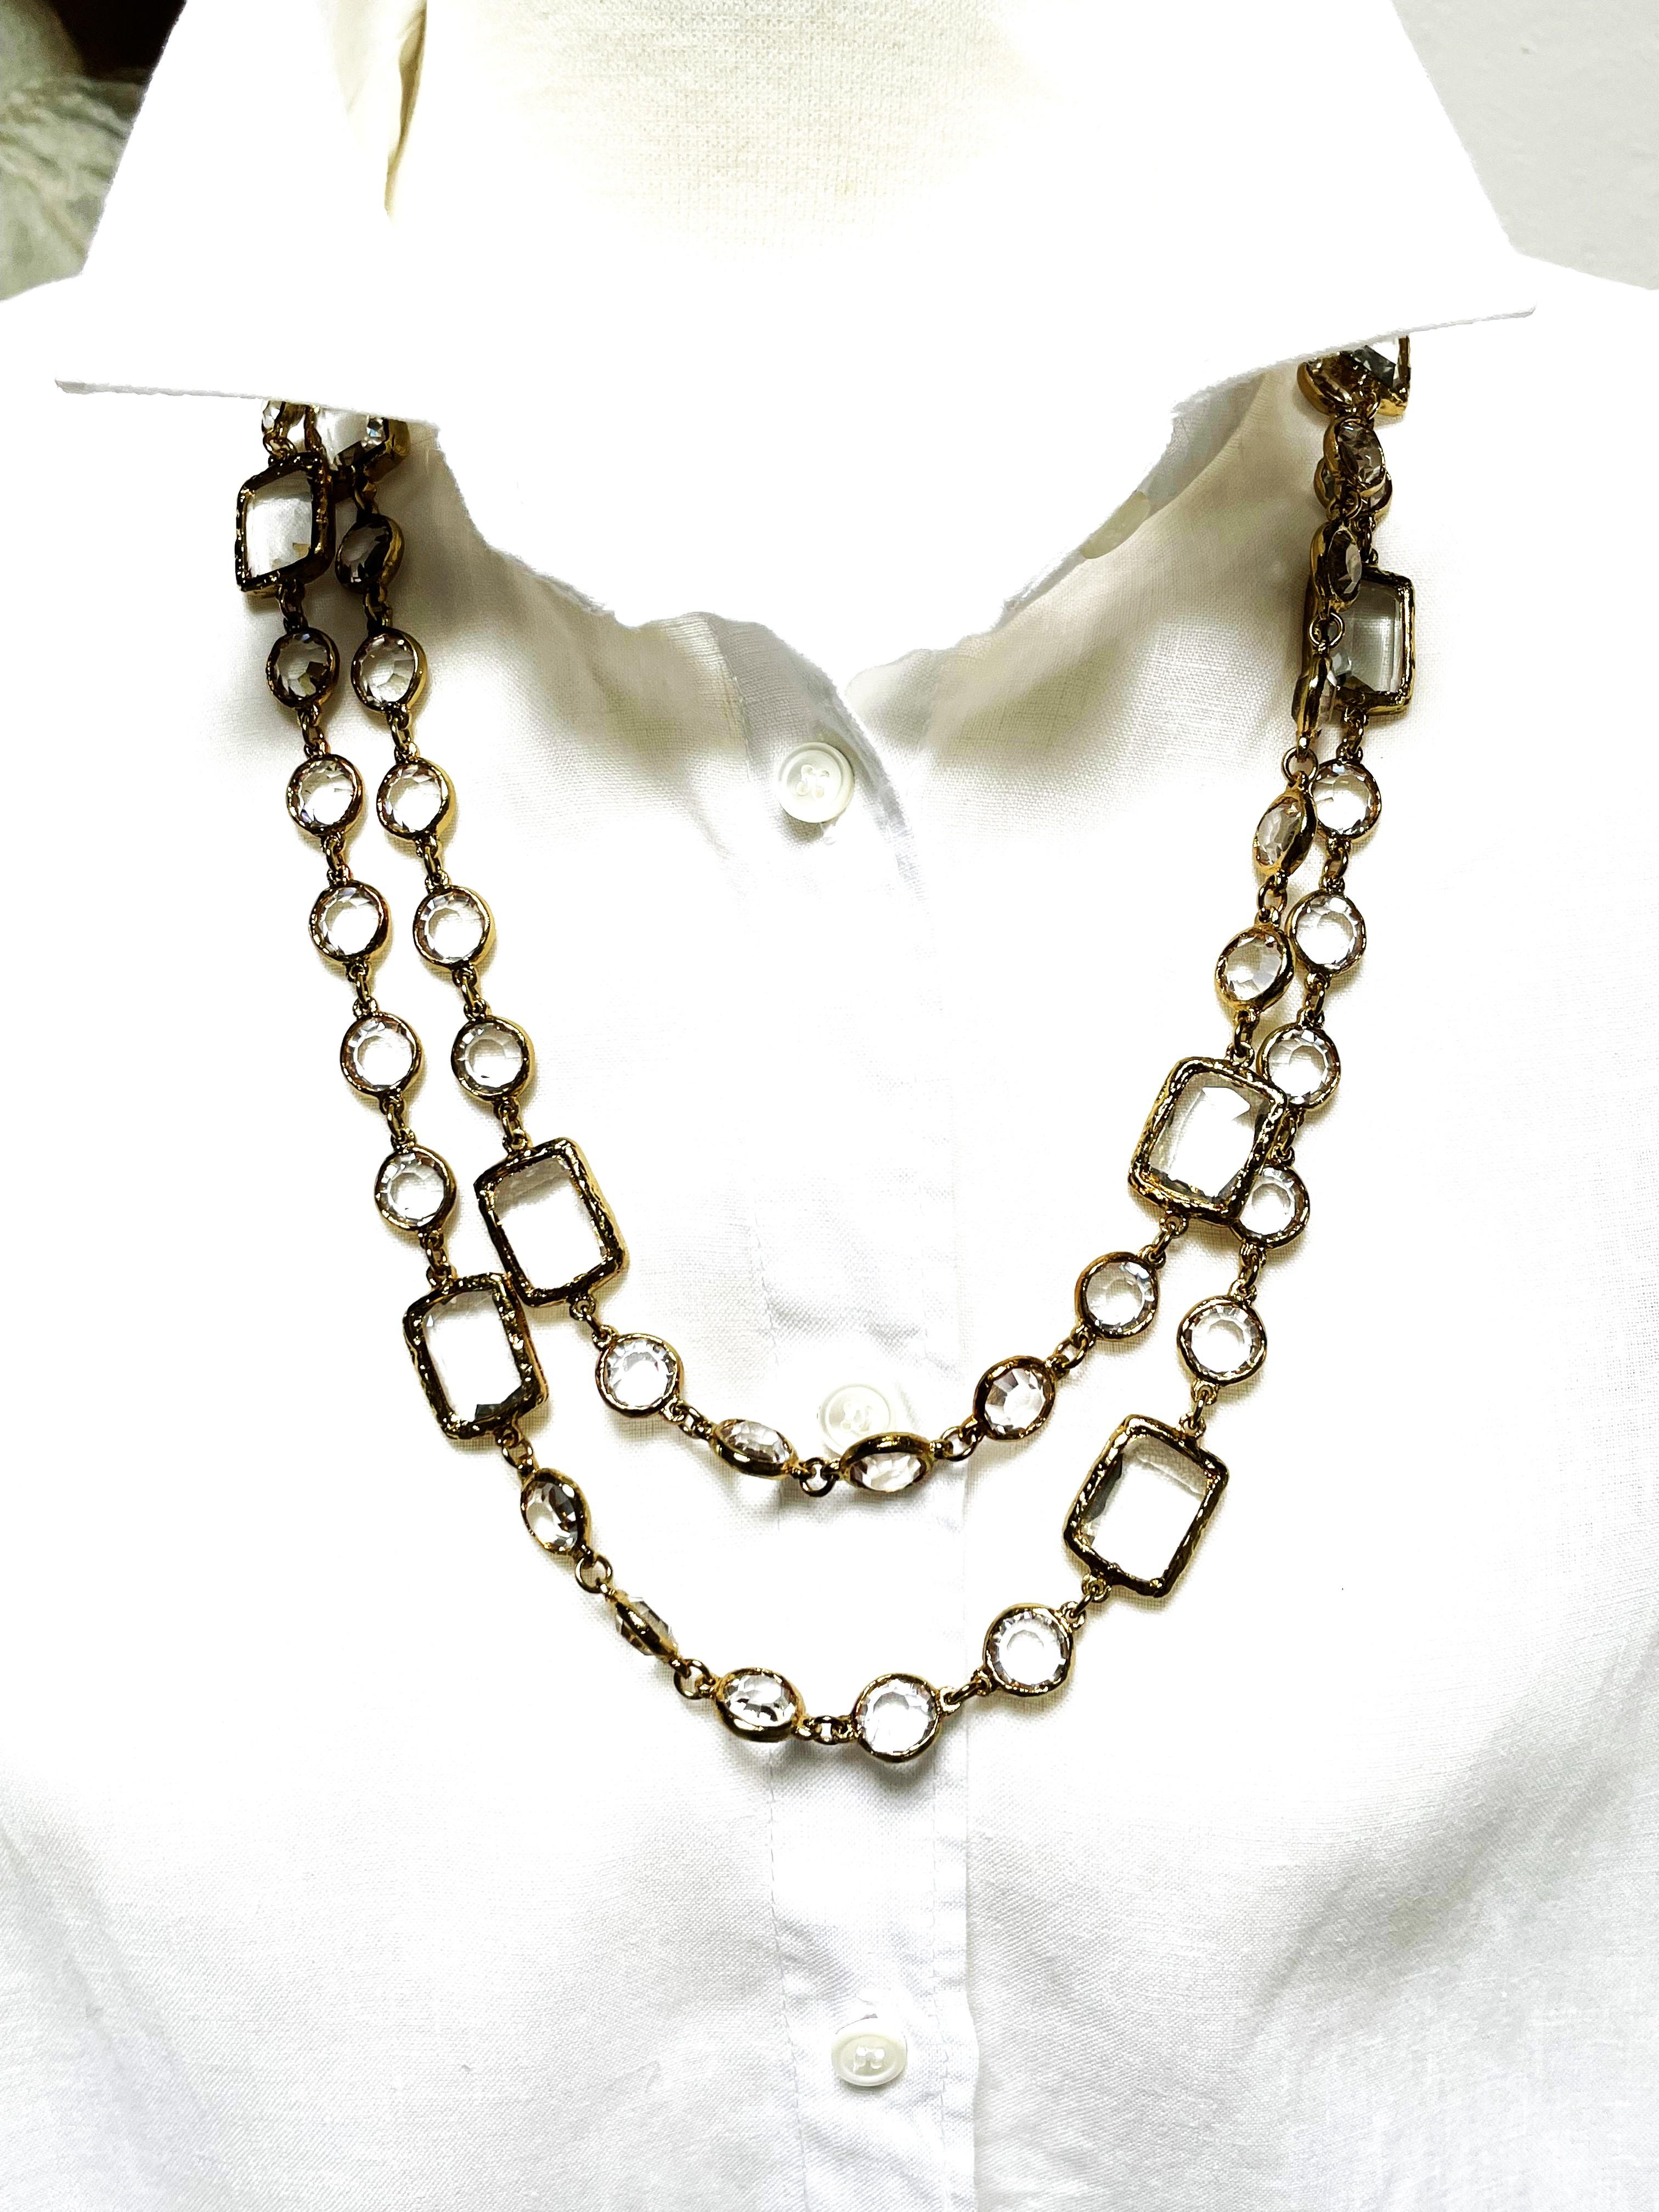 Vintage CHANEL Necklace/Sautoir with 12 clear Chicklets, signed 1981, gold plate 5